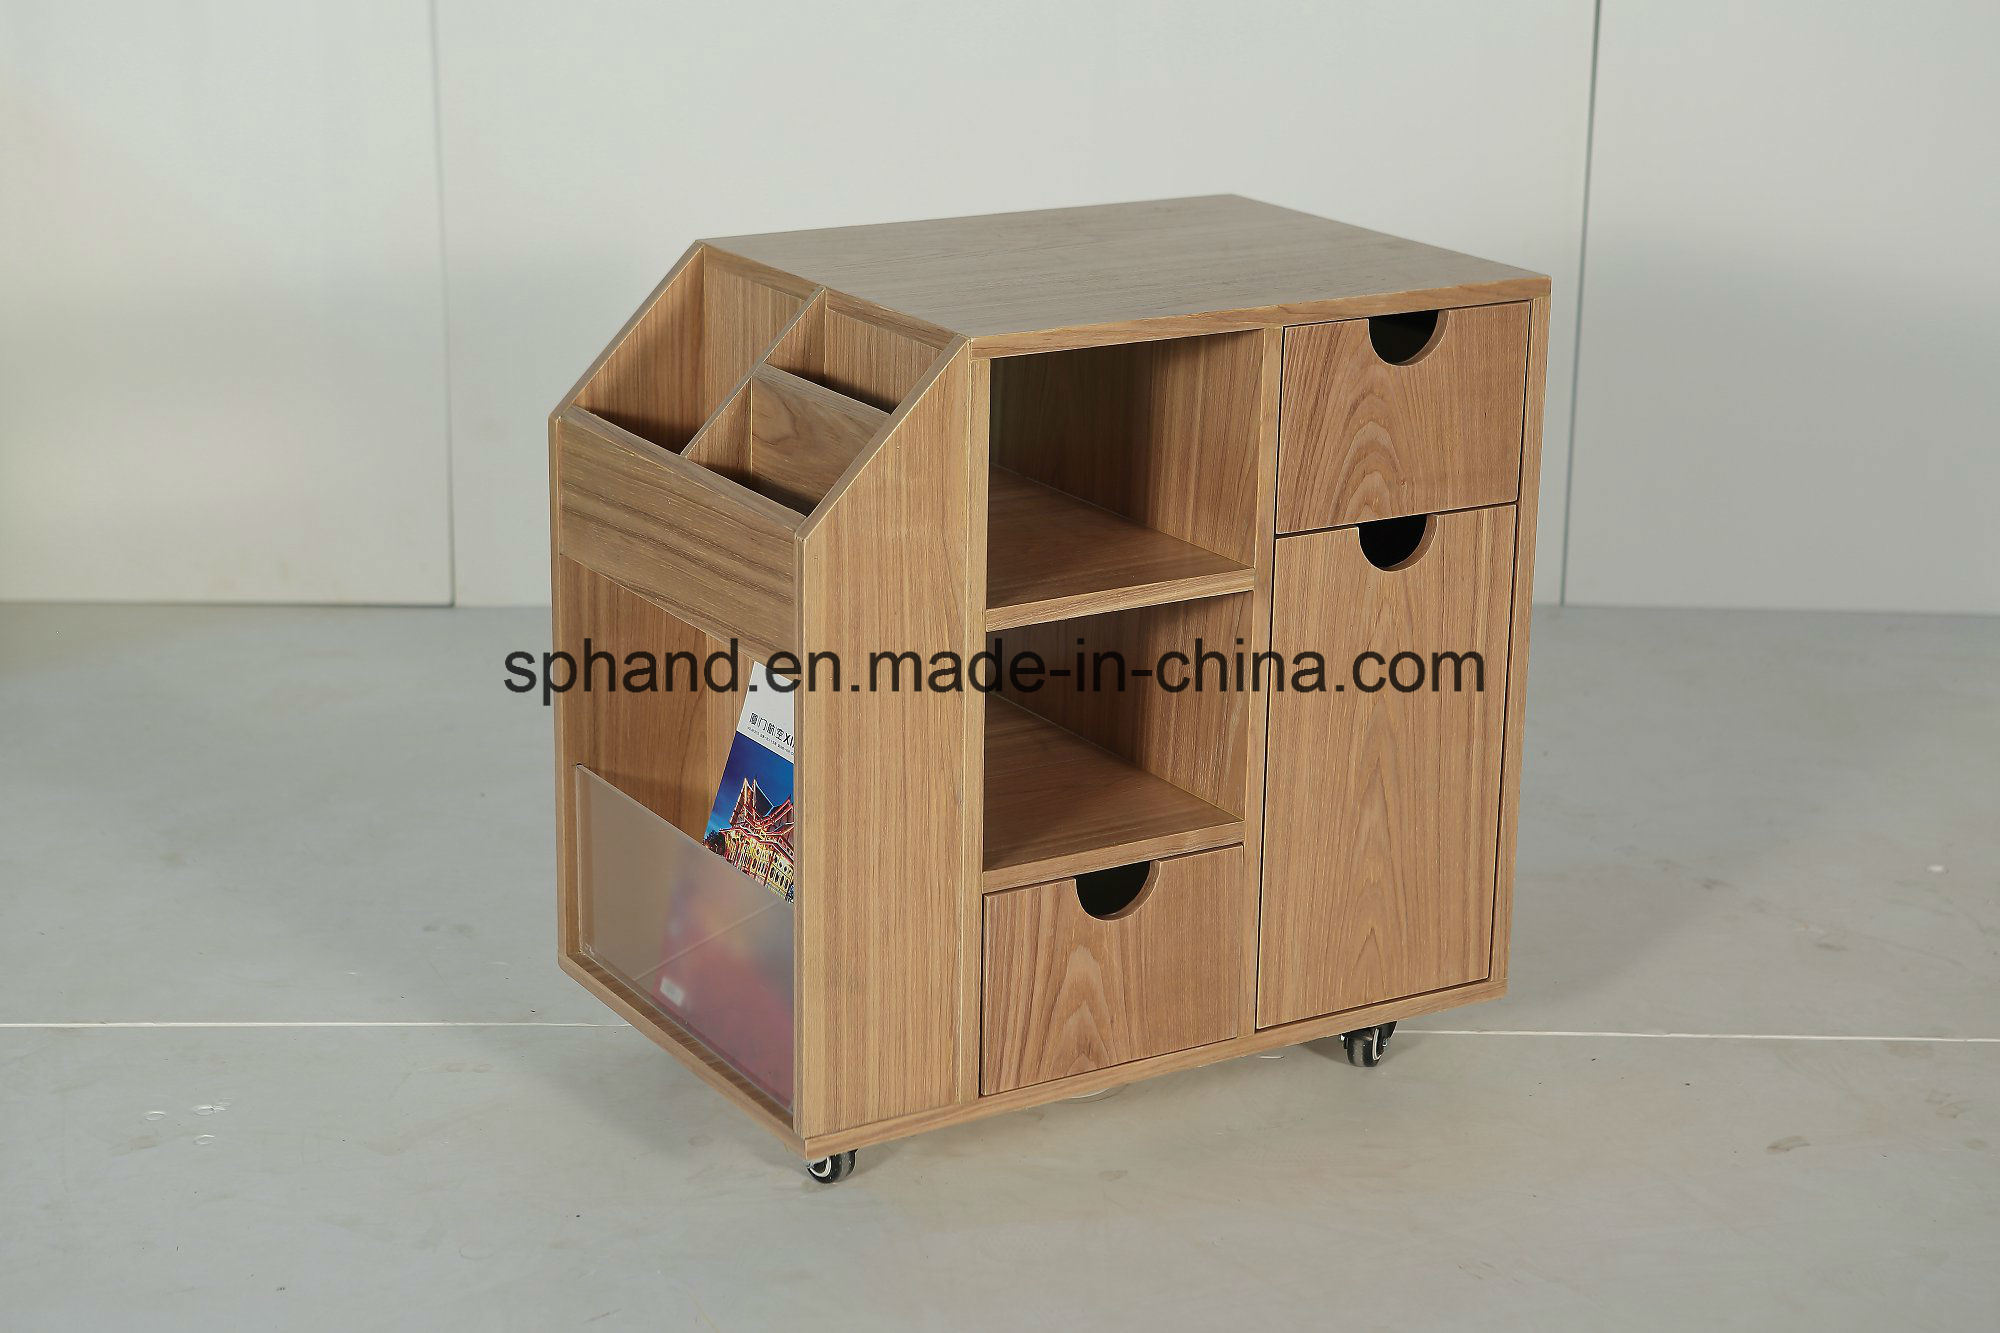 /proimages/2f0j00WQaYvsdJfzkO/moveable-low-height-cabinet-with-castors-for-domitory.jpg